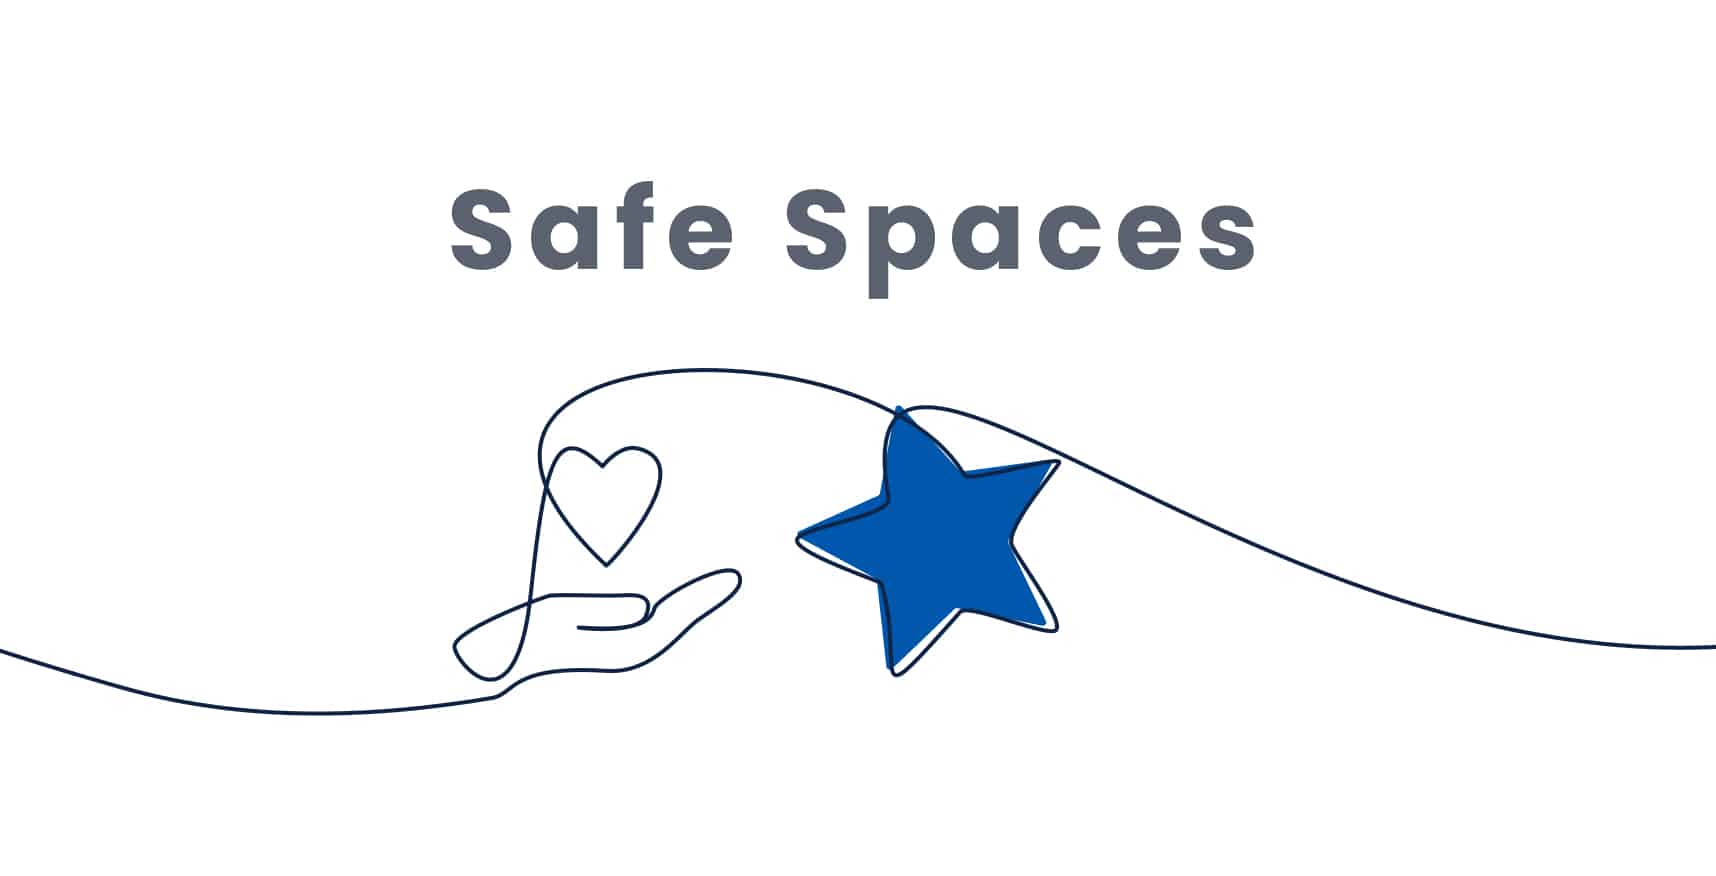 A minimalist drawing shows a hand holding a heart and a star, with the text "Safe Spaces" above.